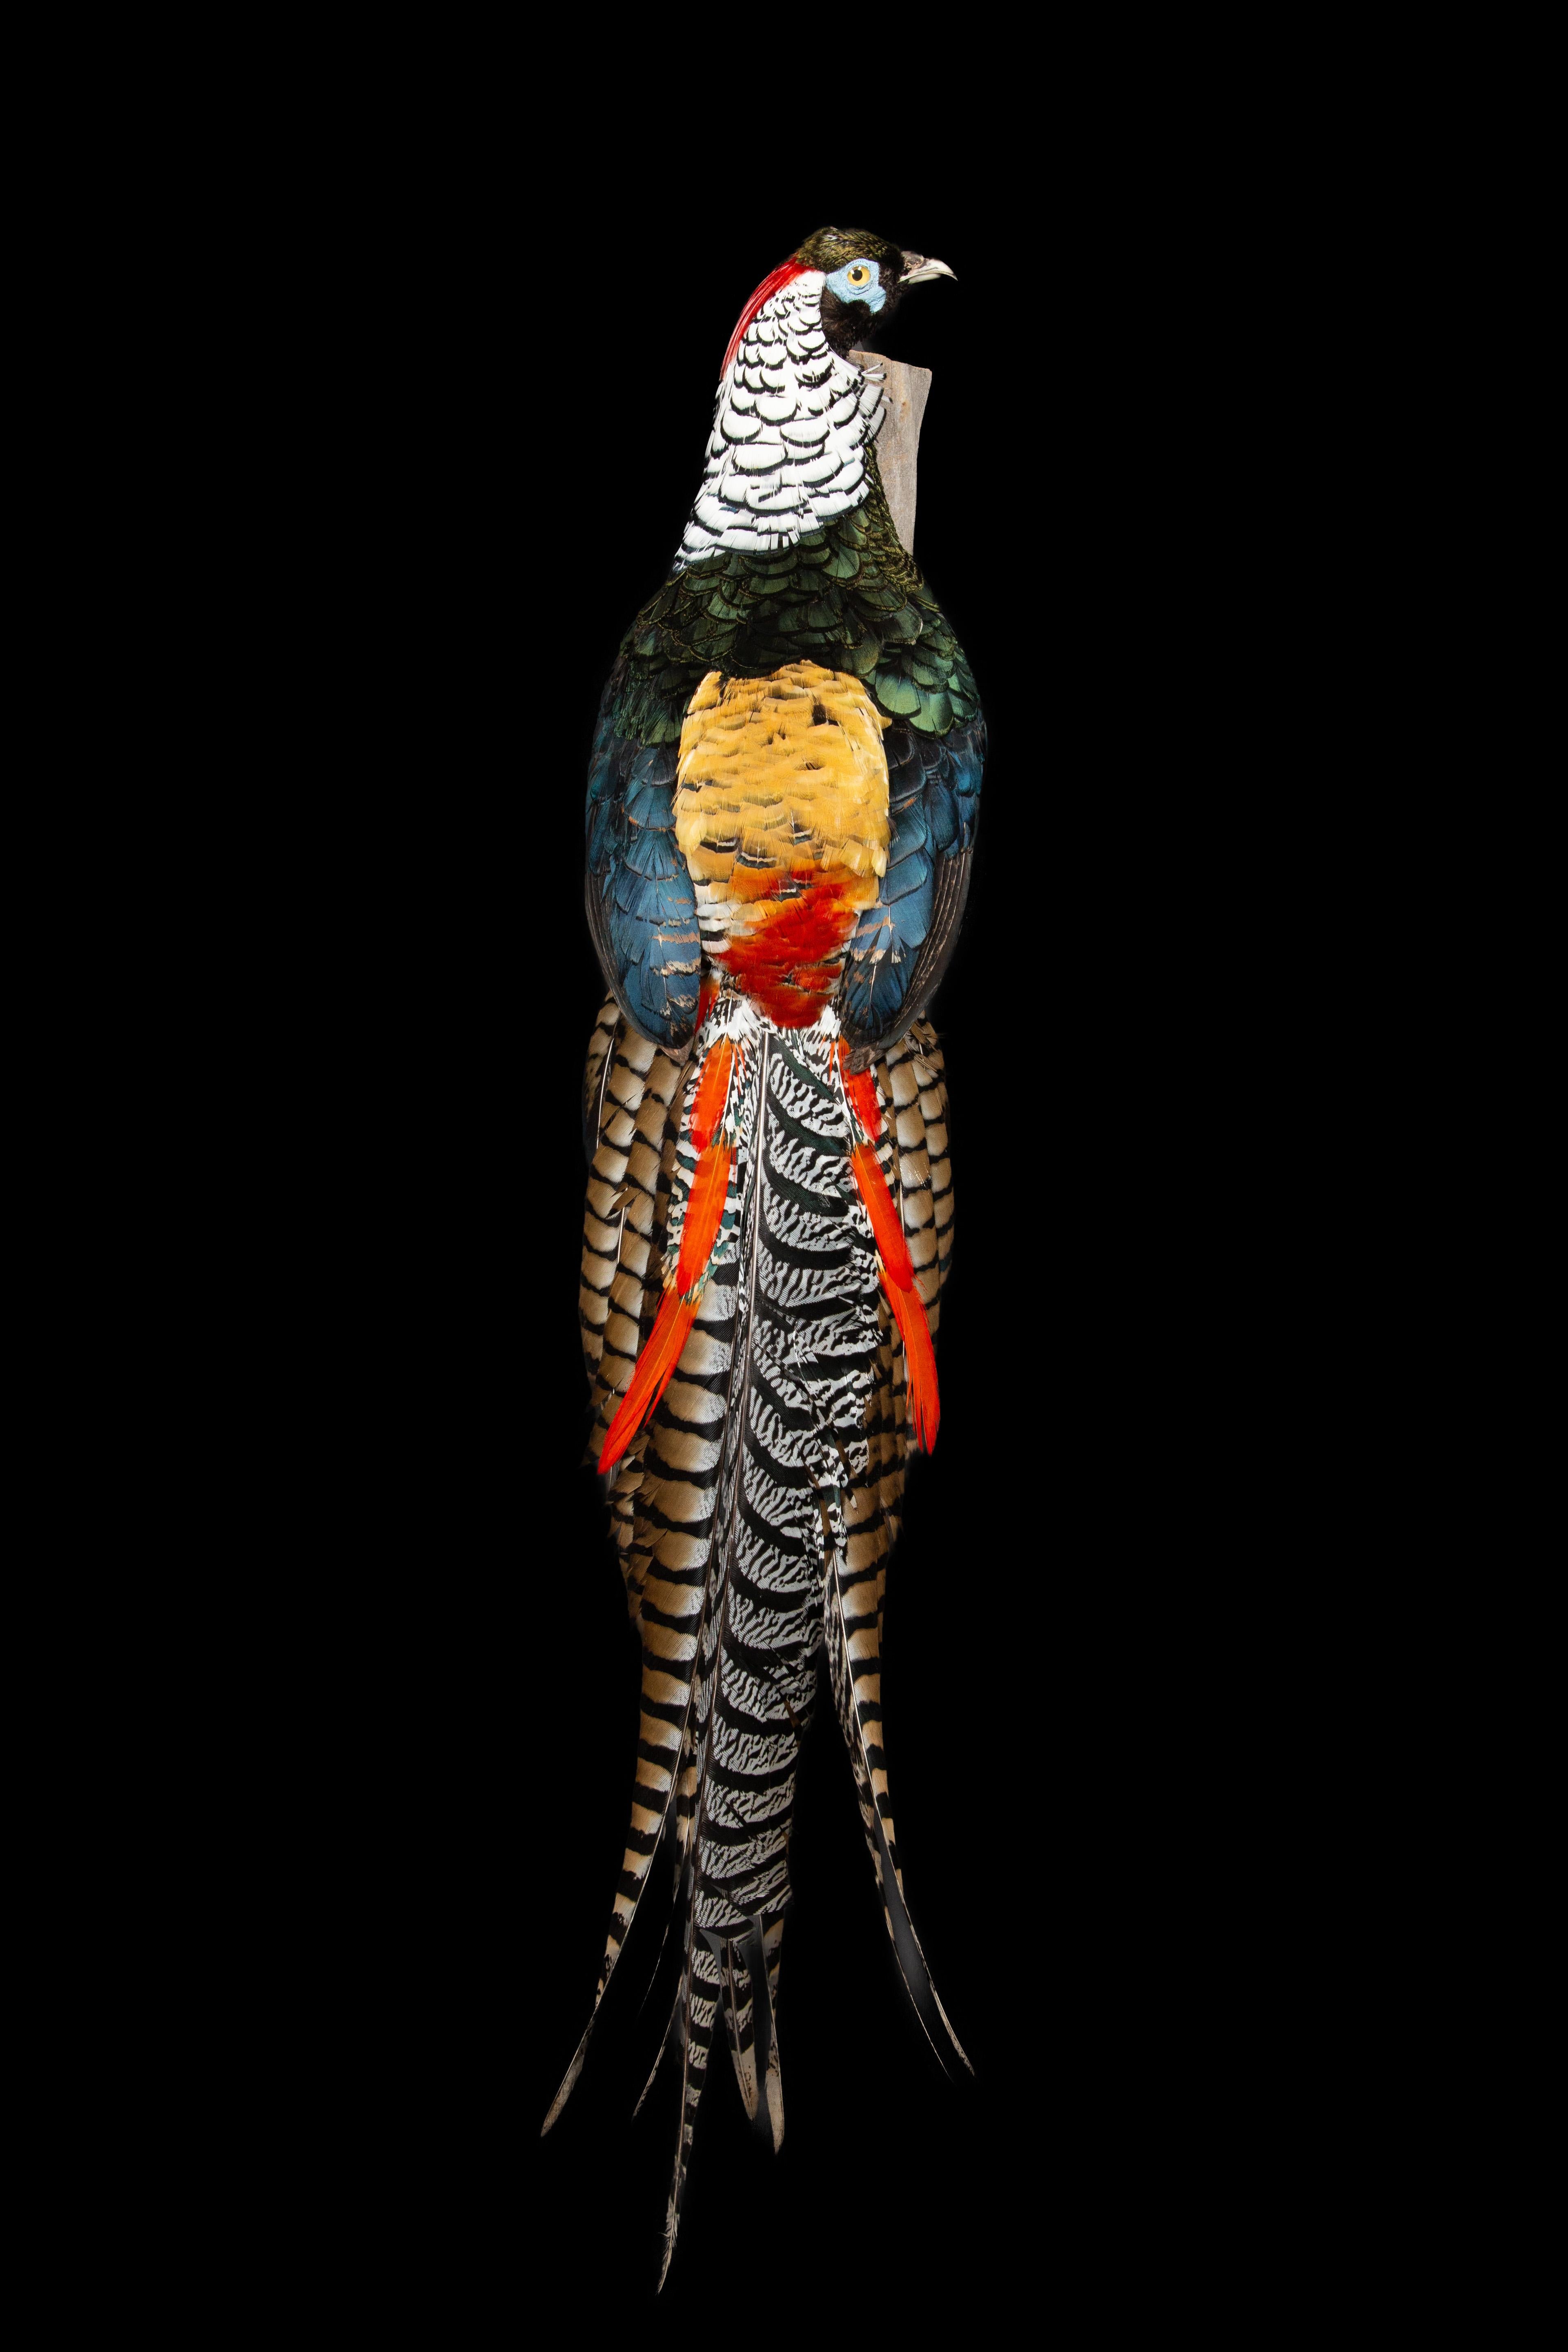 Lady Amherst Pheasant Perched on Naturalistic wooden wall mount:

Measures: 9